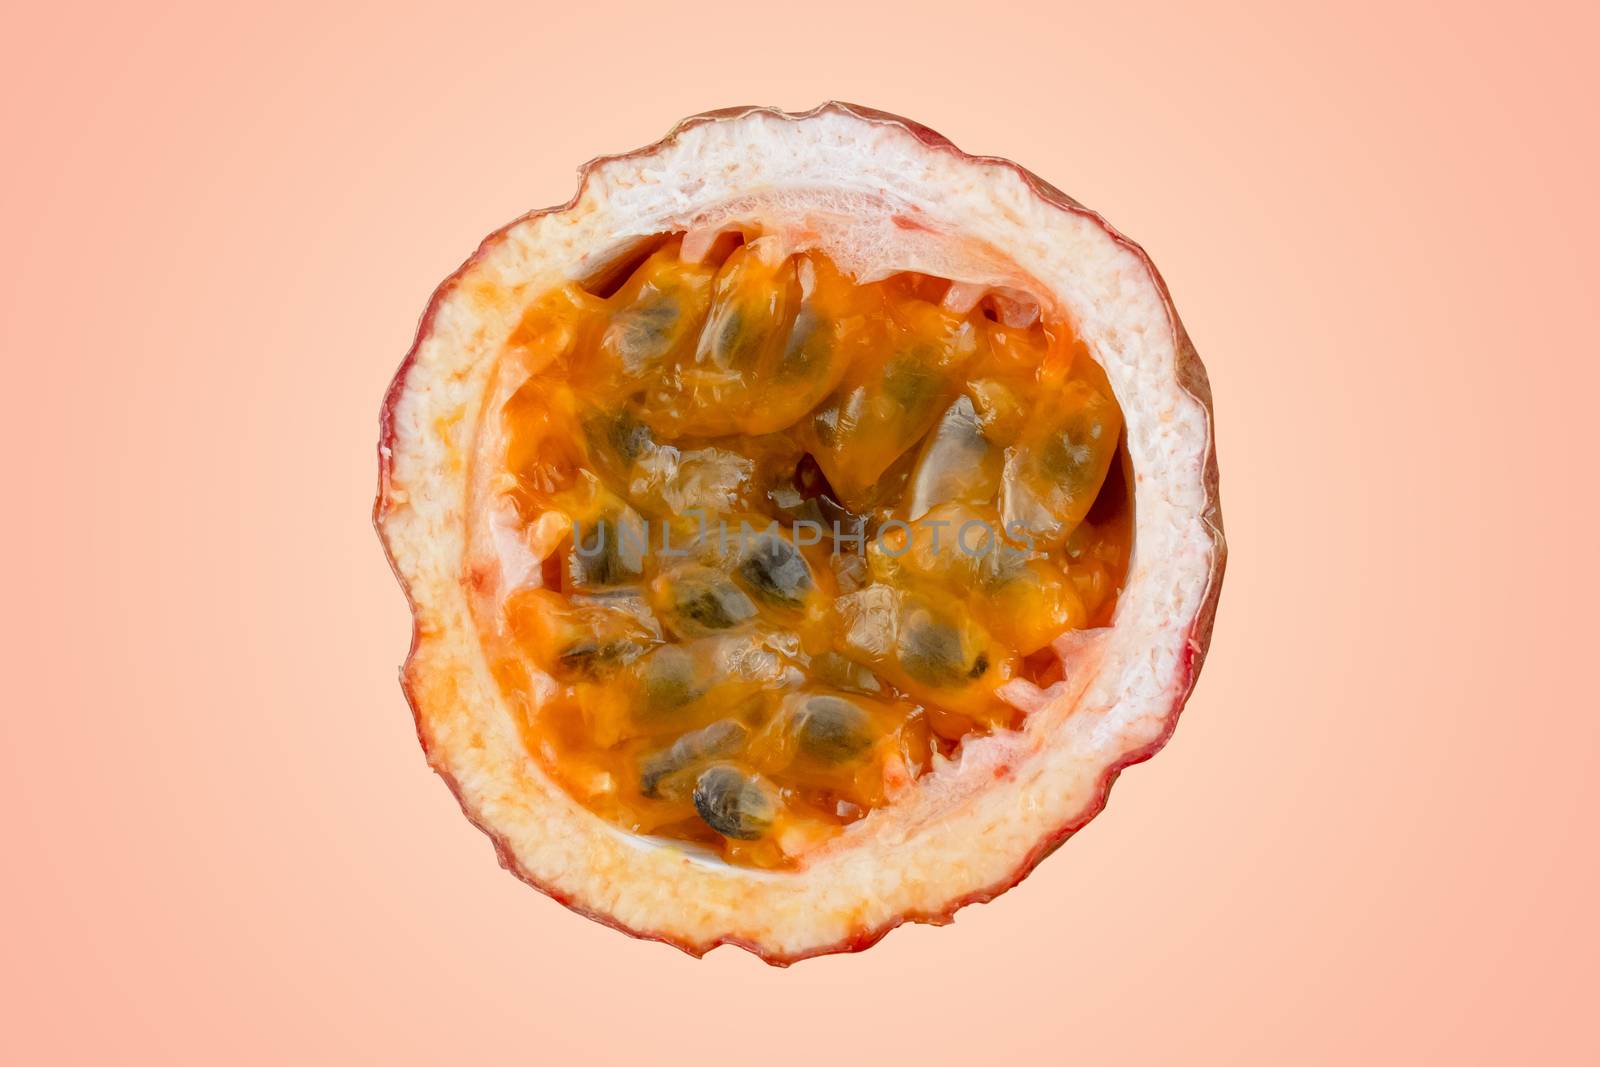 Maracuja cut in half and whole with leaf on orange background. Passion fruit yellow with fruit juice and seeds. by Andreajk3